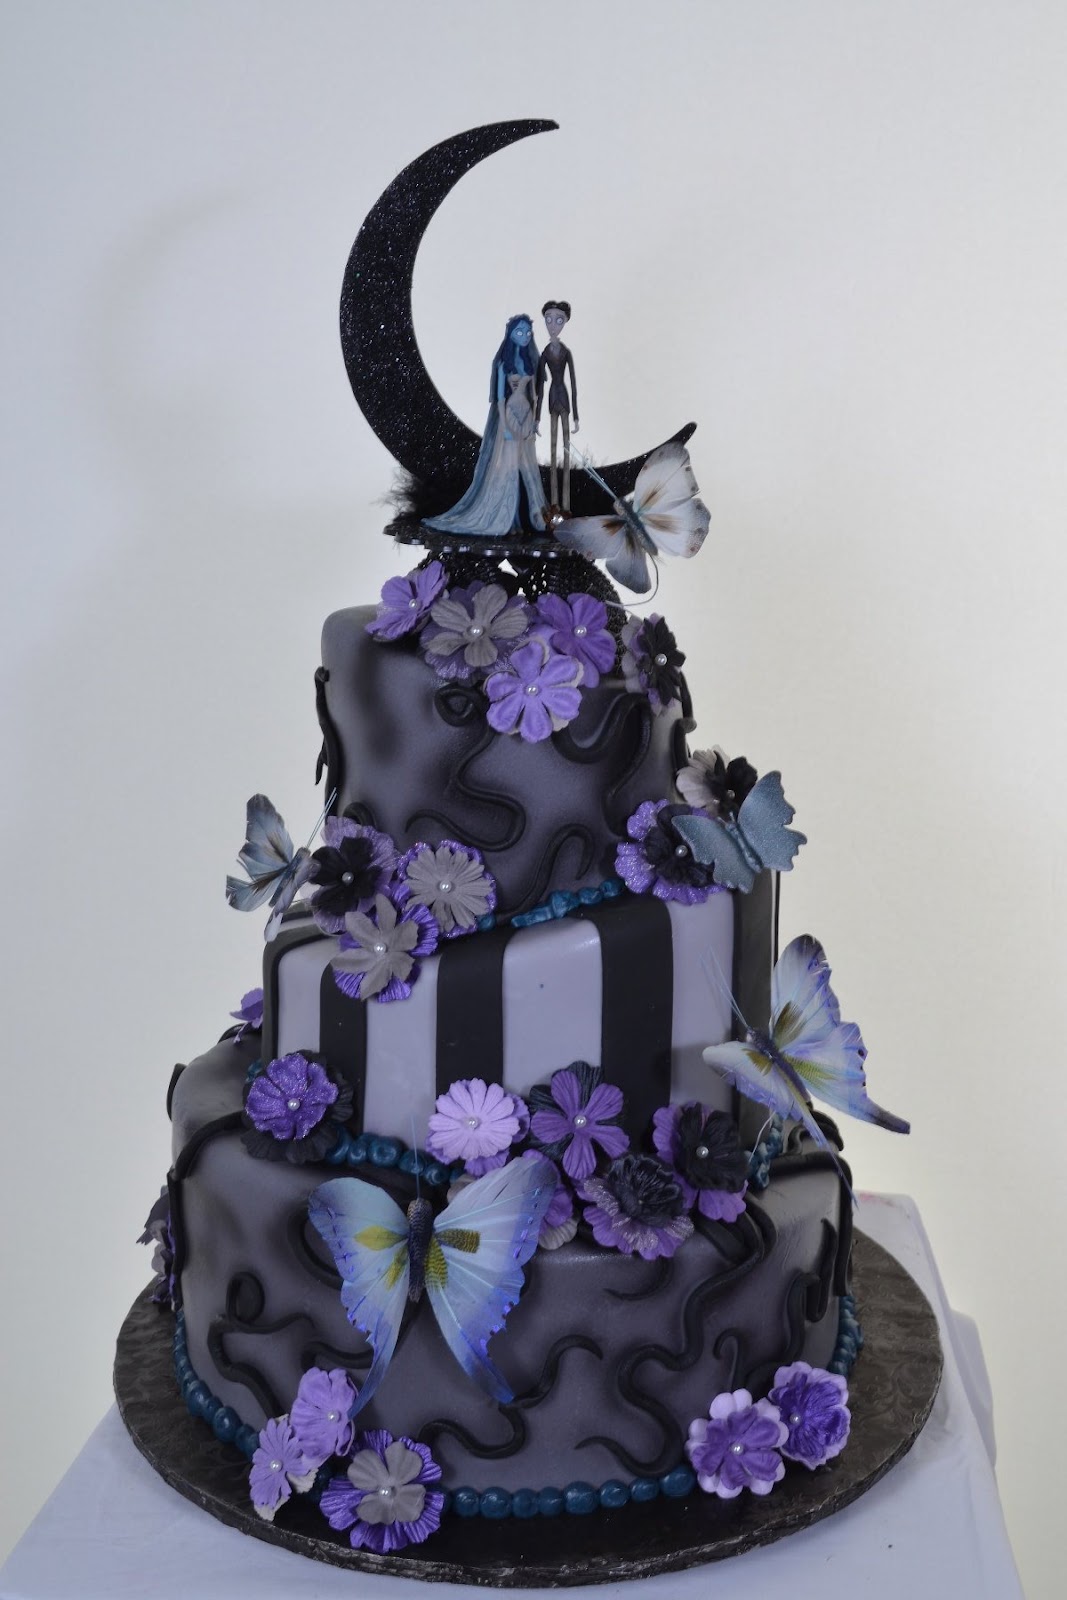  Wedding  Cakes  Pictures Nightmare  Before  Christmas  Wedding  